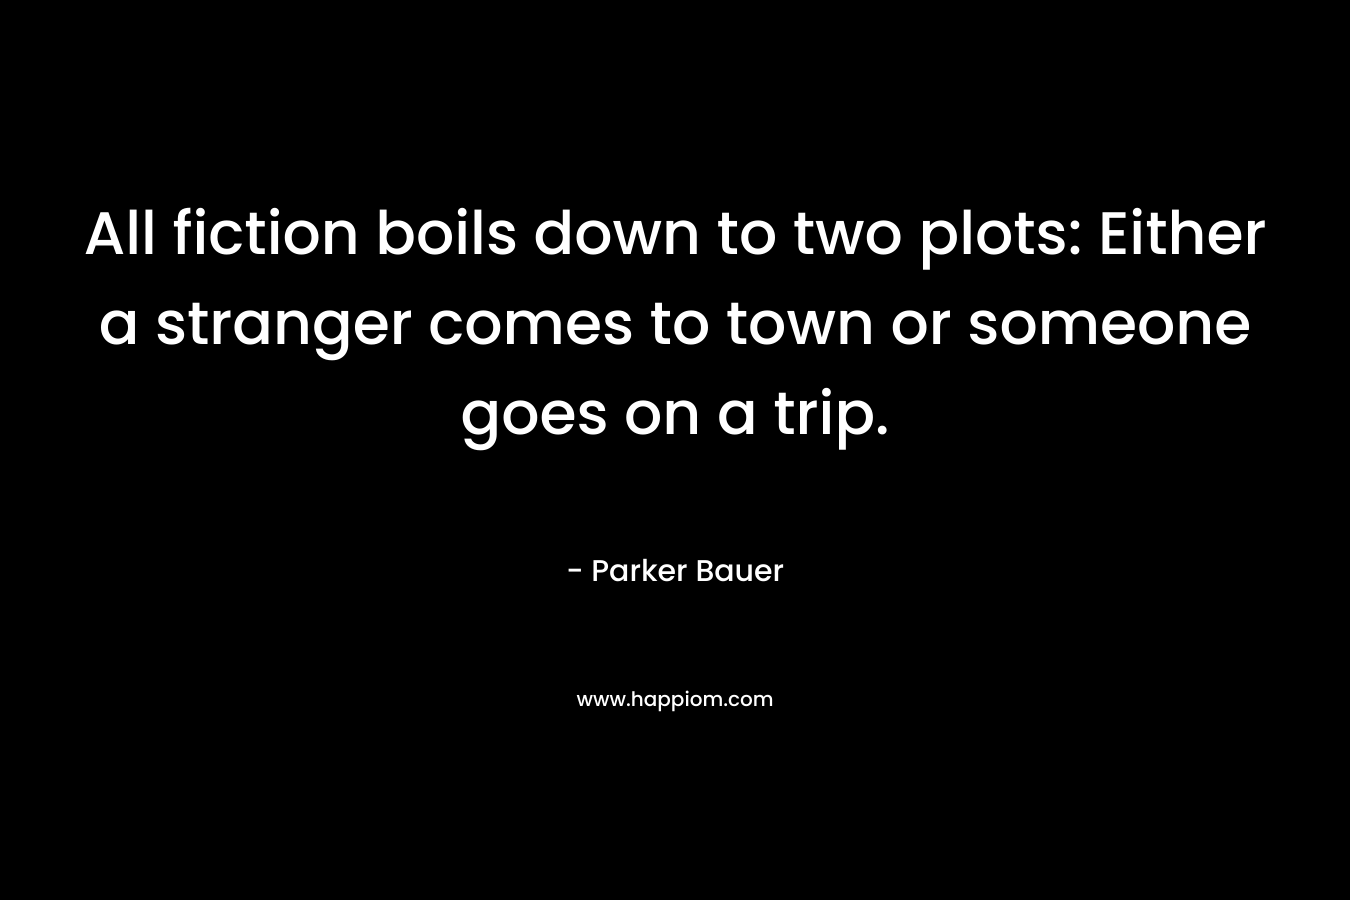 All fiction boils down to two plots: Either a stranger comes to town or someone goes on a trip.